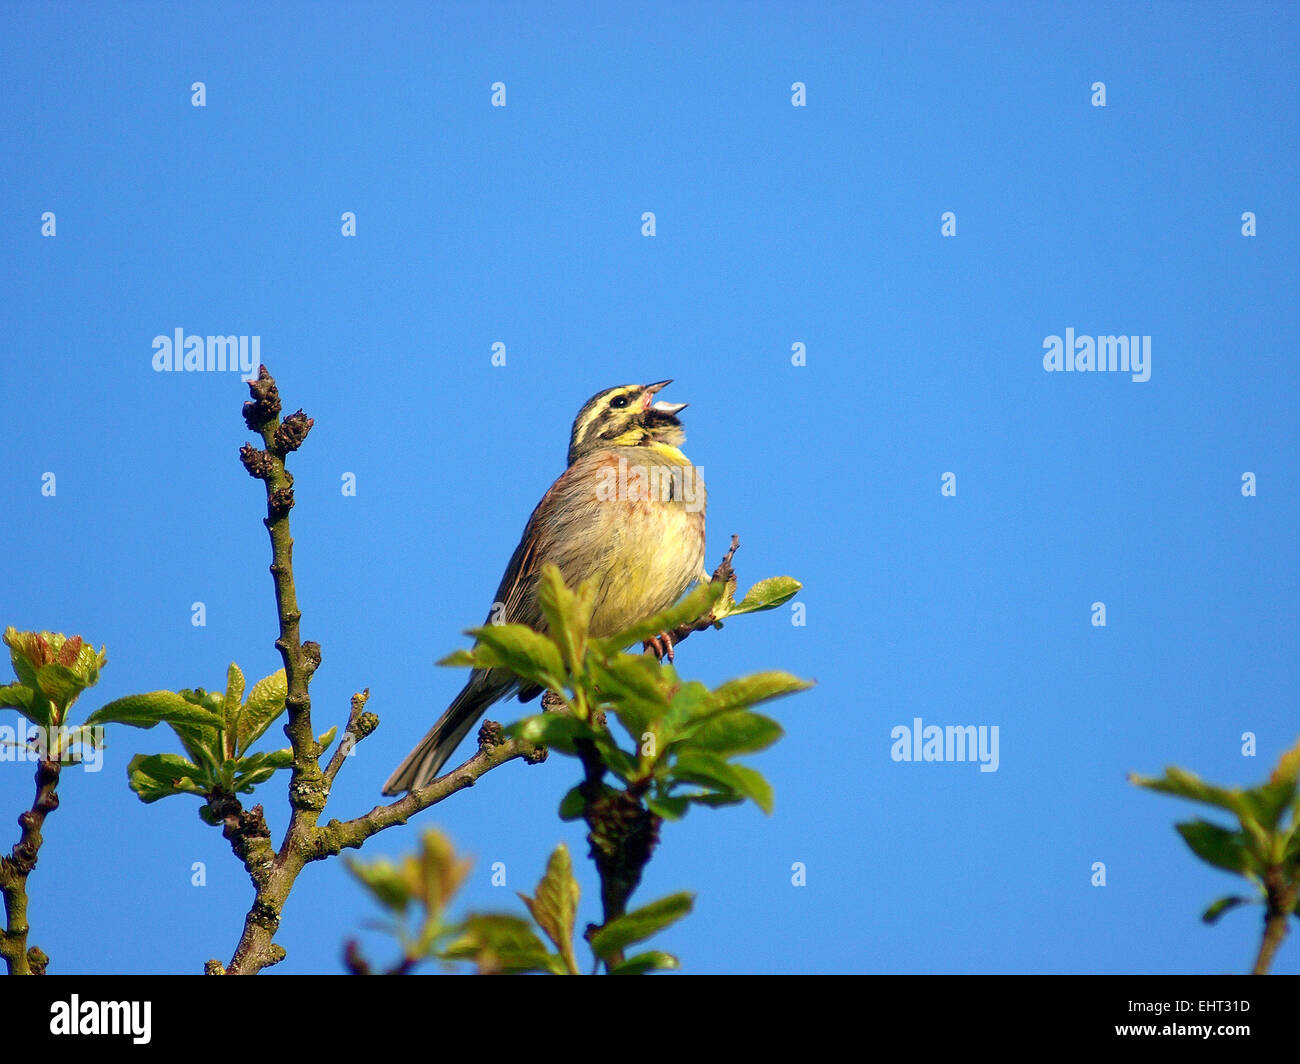 male in song against a blue sky. La Brenne, France, April 2008 Stock Photo